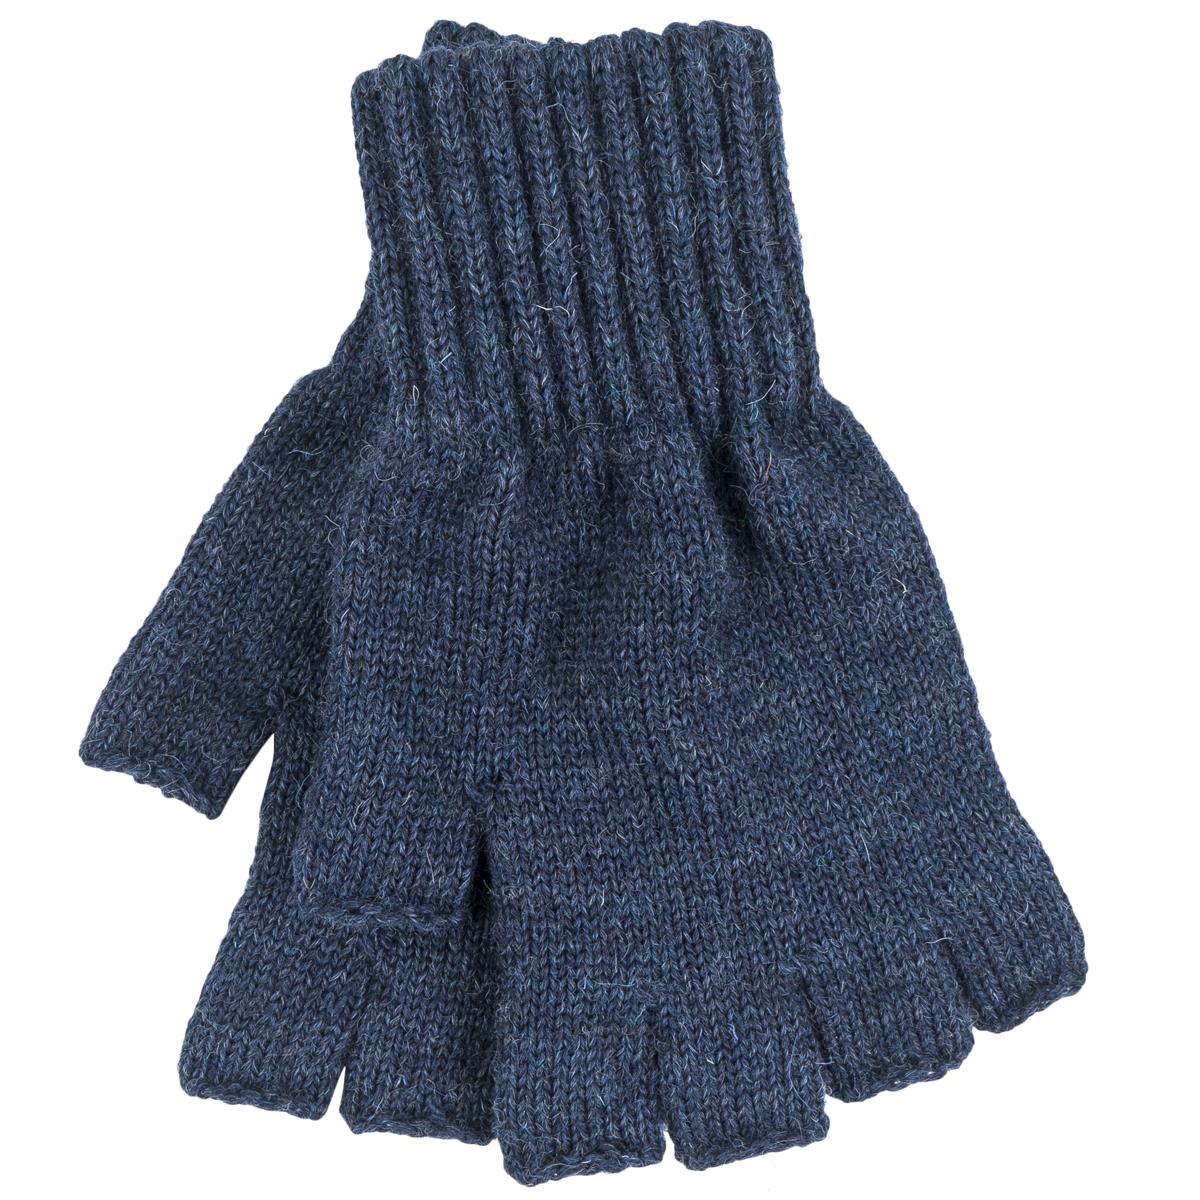 What are the properties of the barbour fingerless gloves' seven-gauge lambswool yarn?